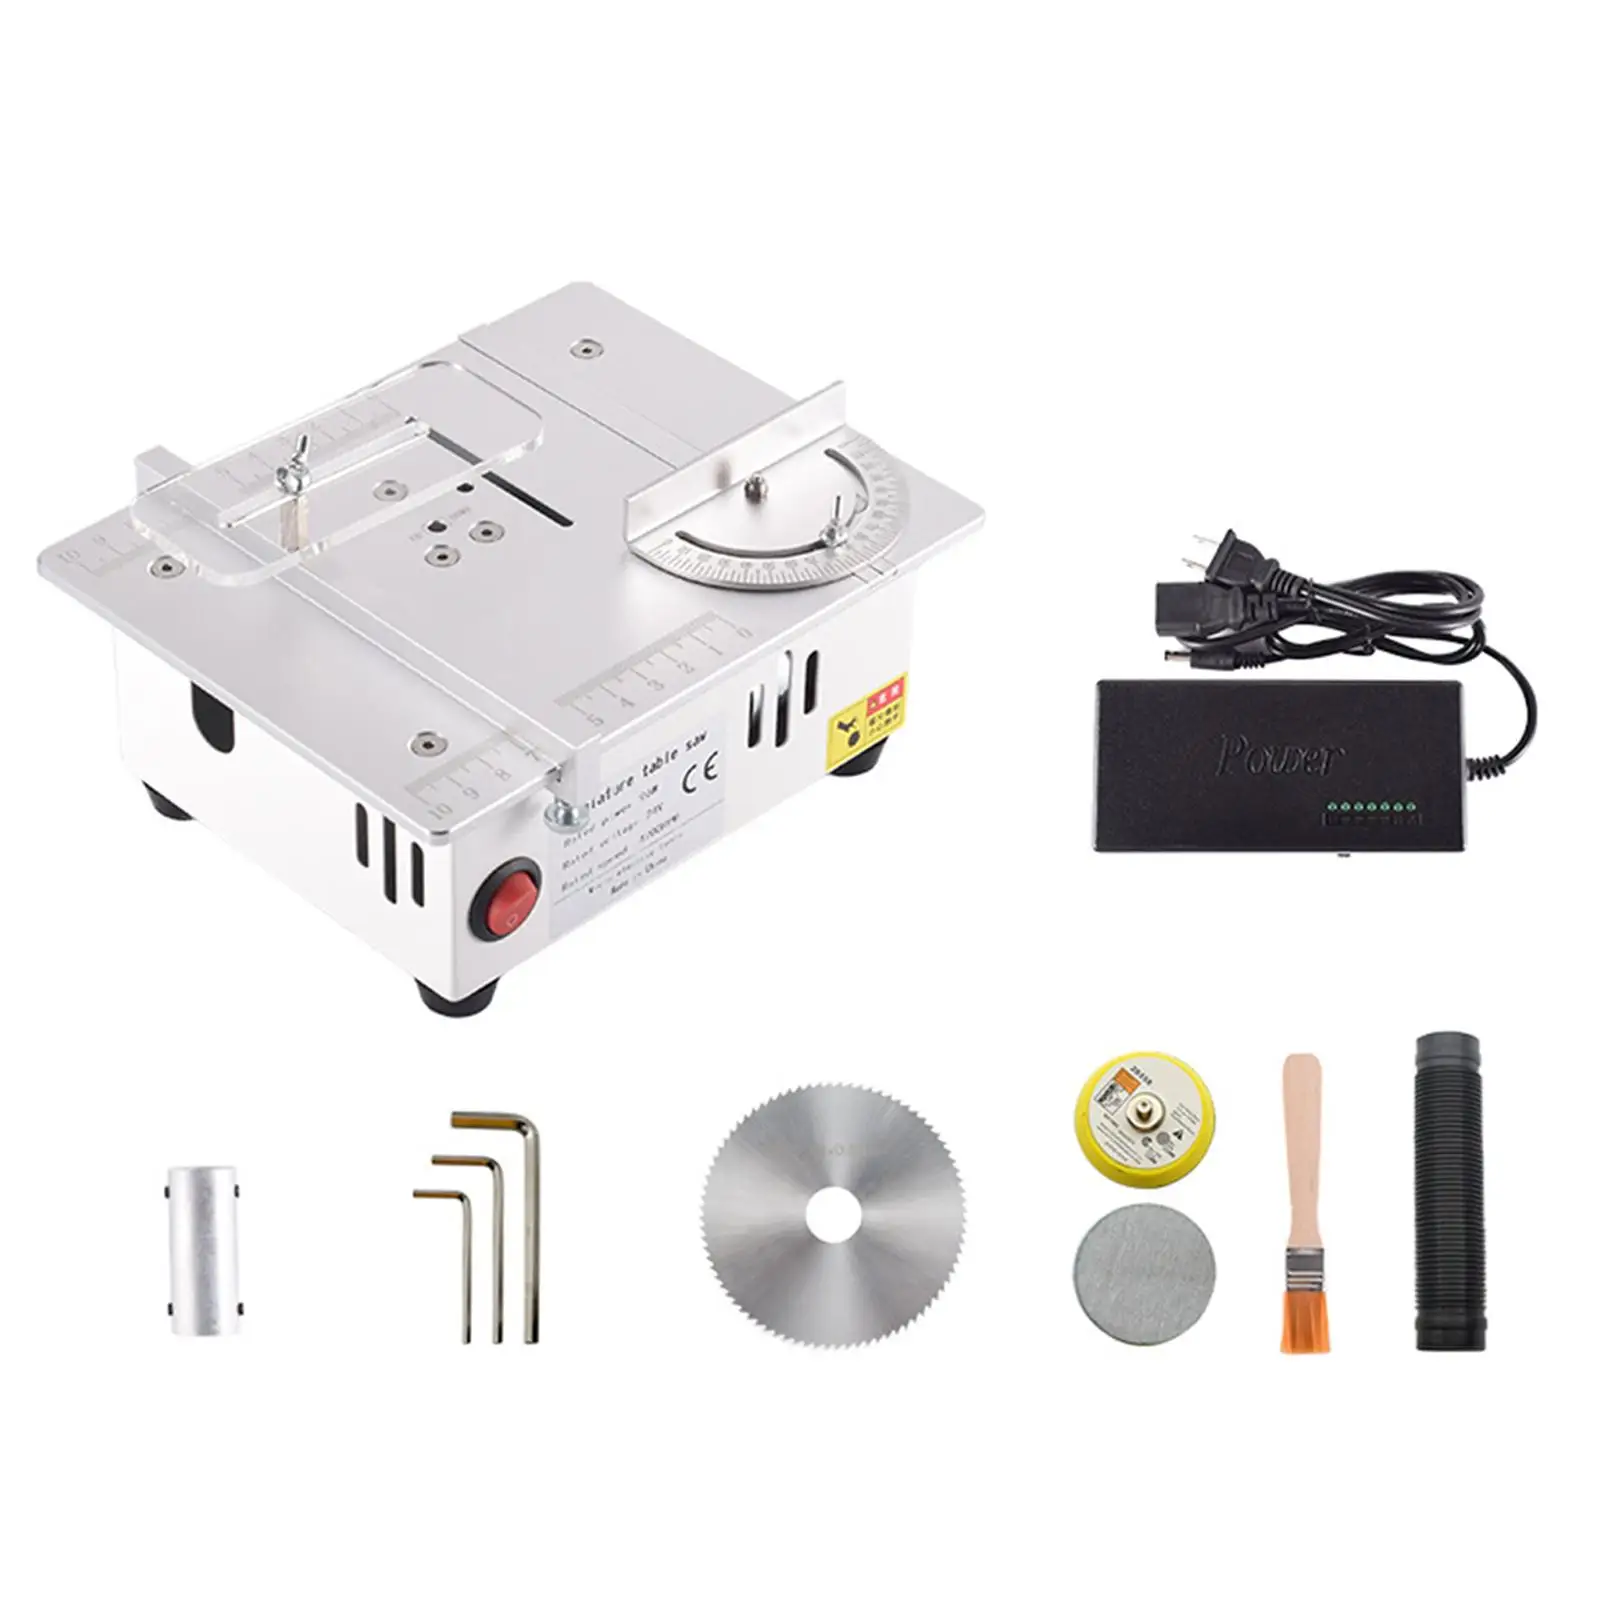 Mini Table Saw 96W Multifunctional 7 Gear Adjustable Micro Table Saw for Acrylic Cutting Crafts DIY Woodworking Metal US Adapter